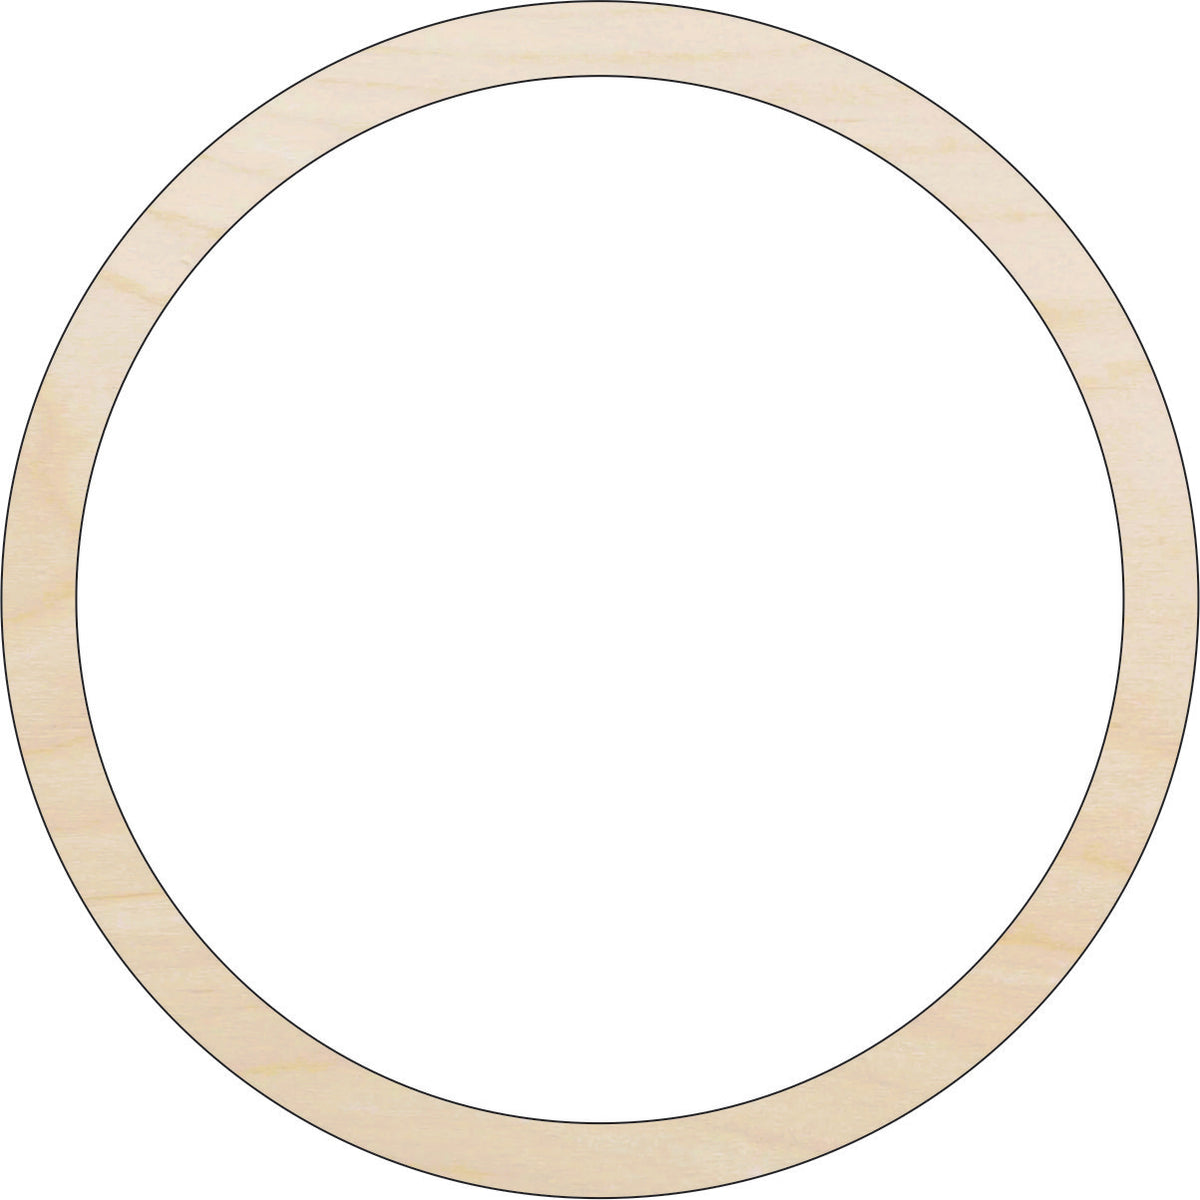 Wood Circles 23 inch 1/2 inch Thick, Unfinished Birch Plaques